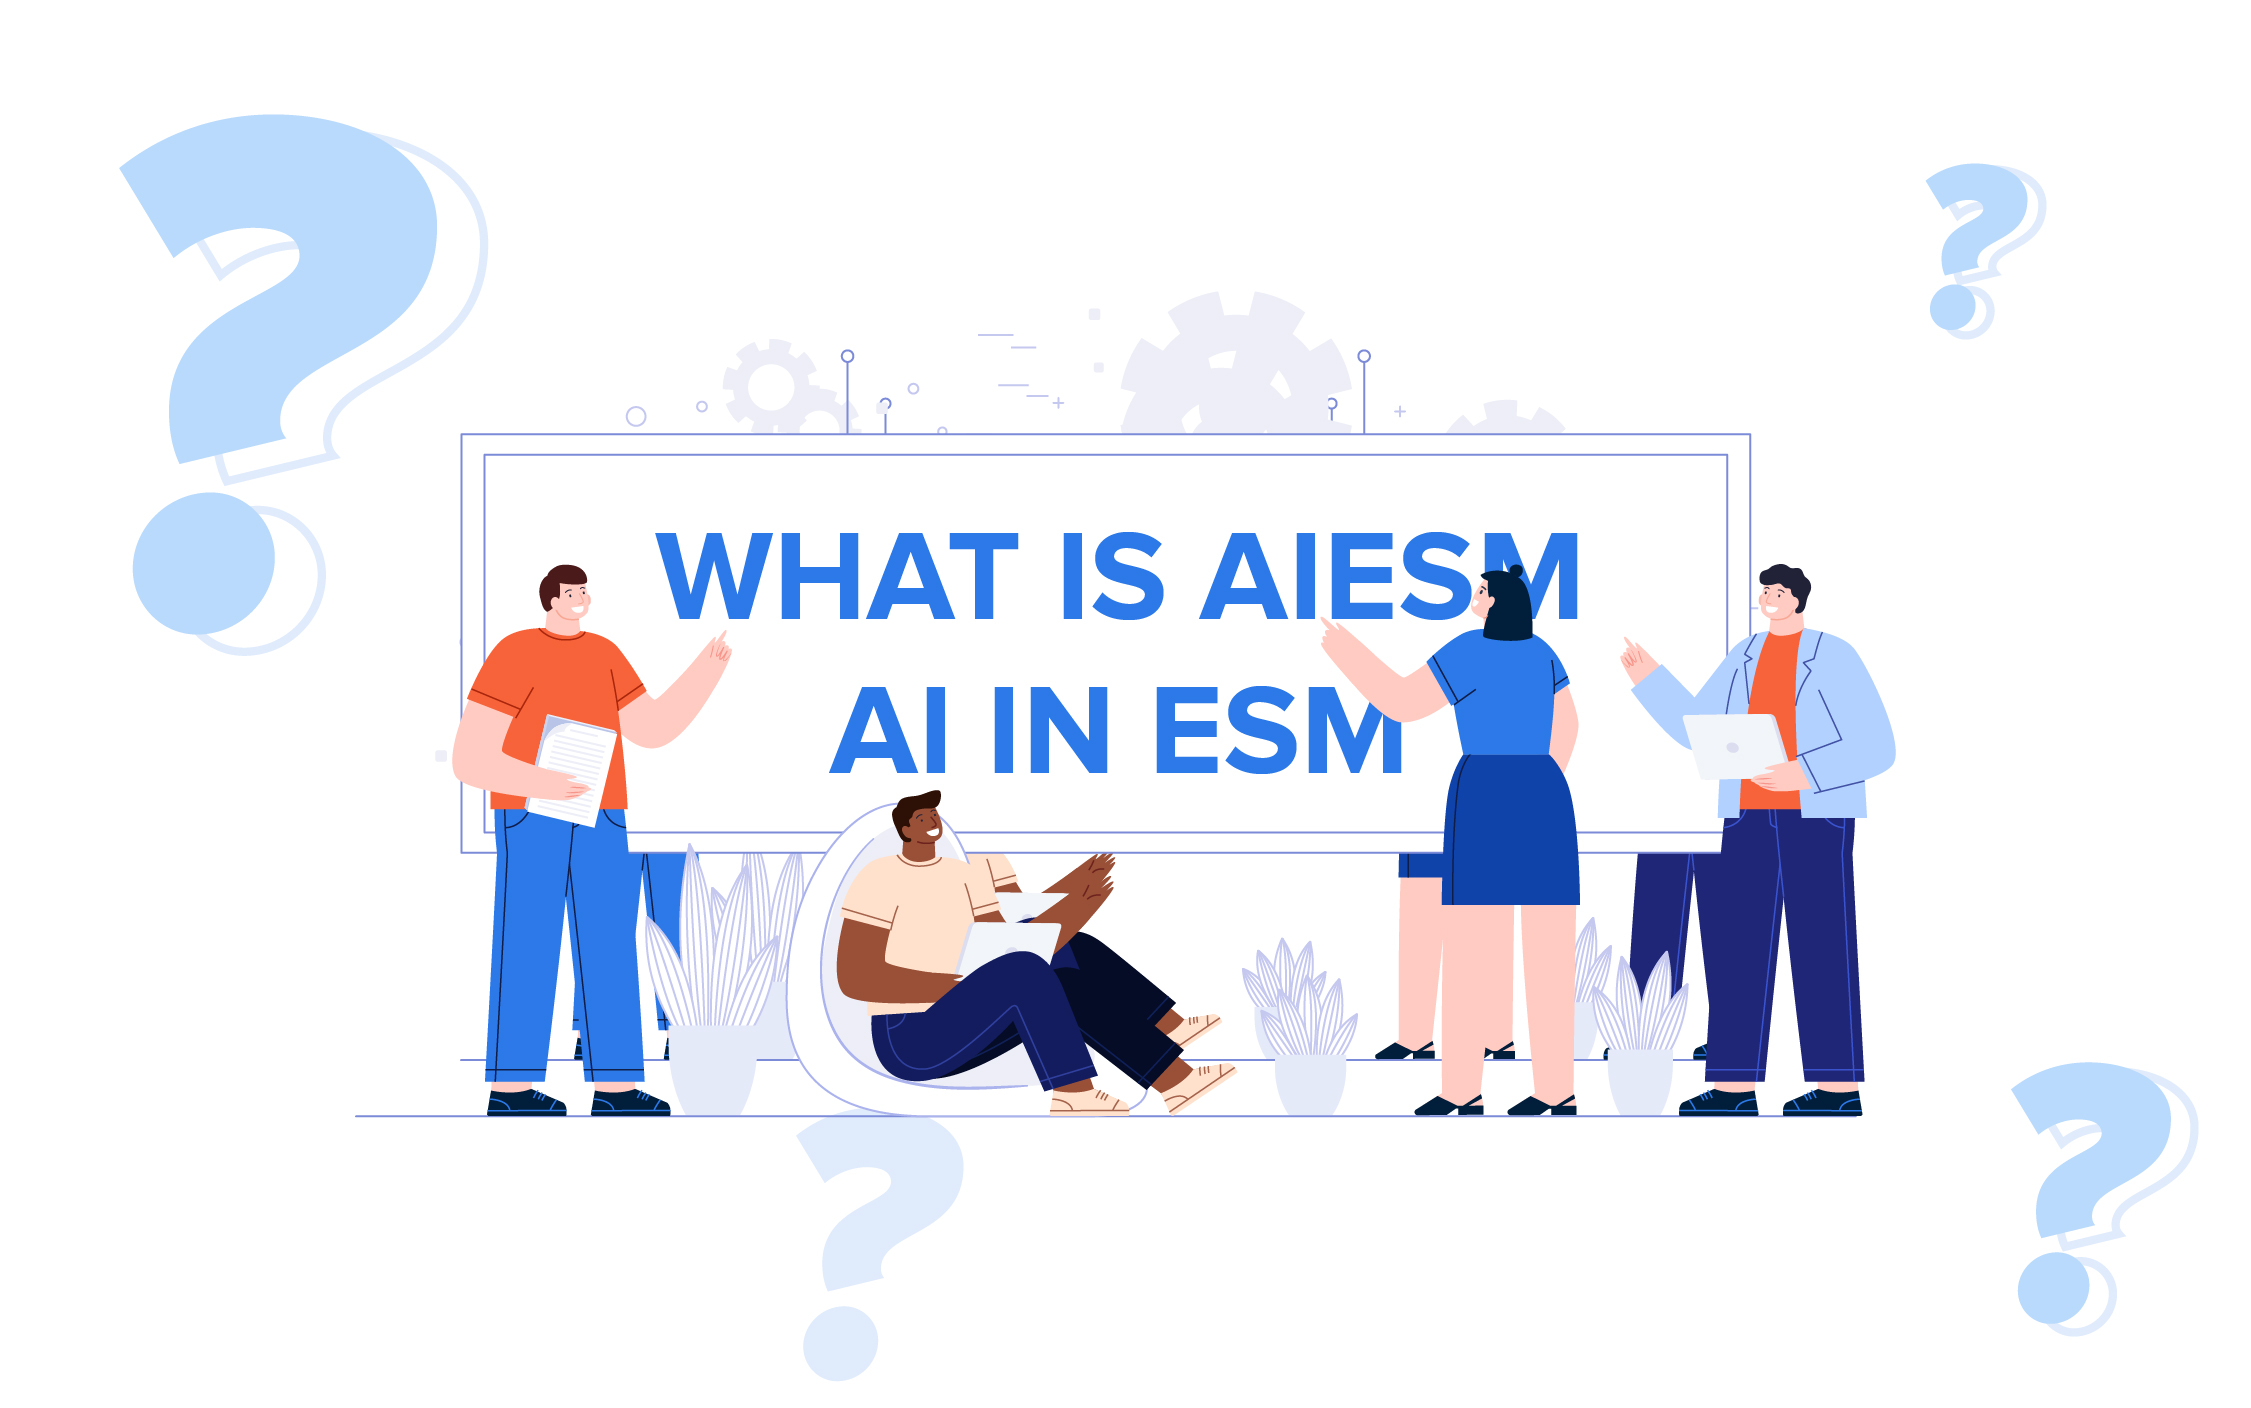 What Is Aiesm - Ai In Esm?